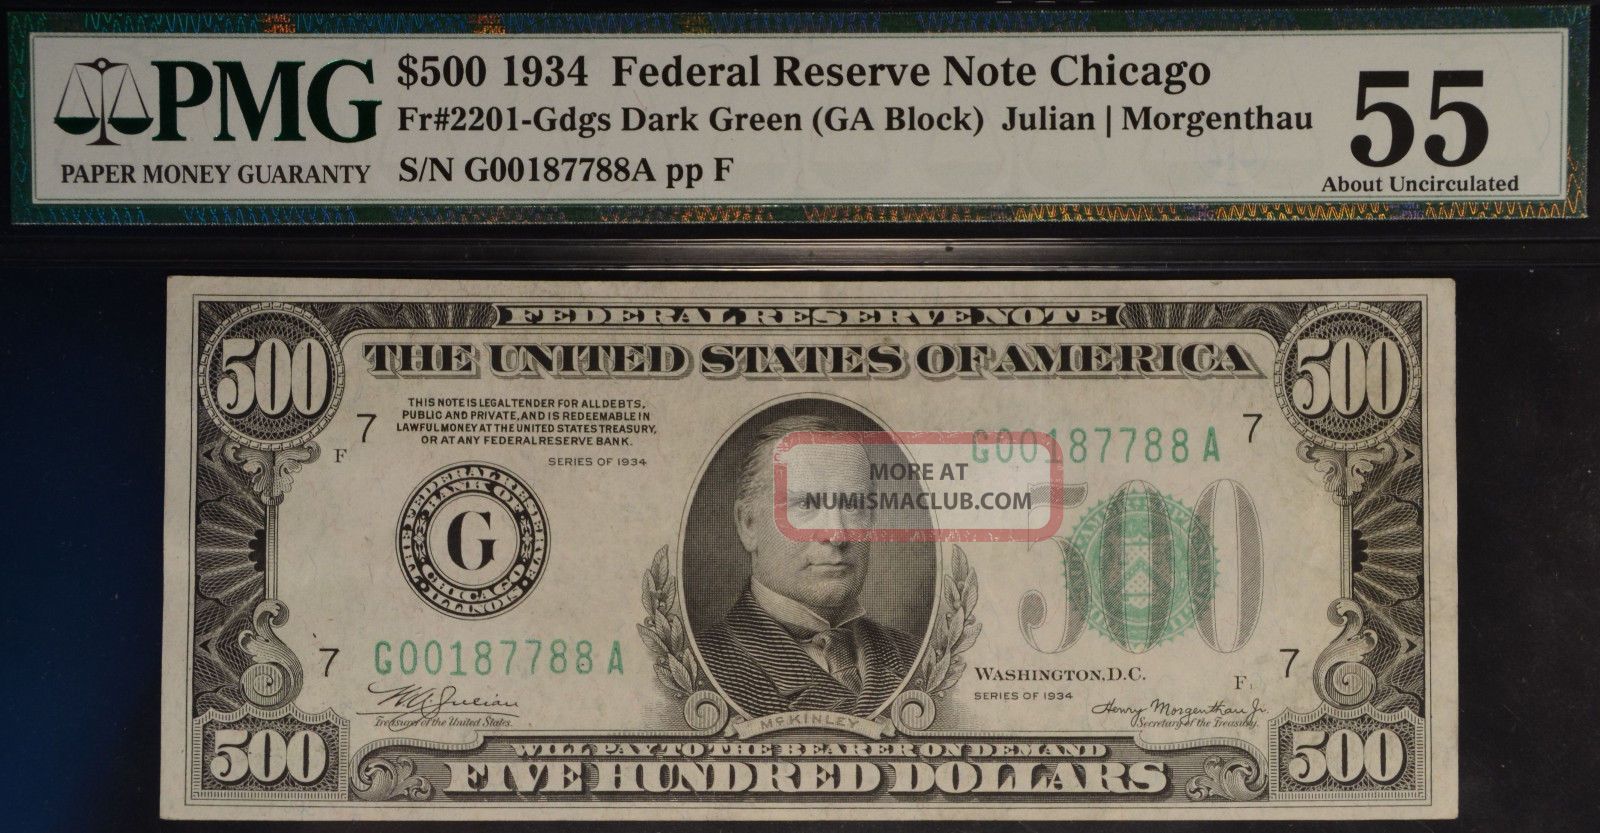 1934 $500 Federal Reserve Note Chicago Fr 2201 - Gdgs Dark Green Ga Block Pmg 55 Small Size Notes photo